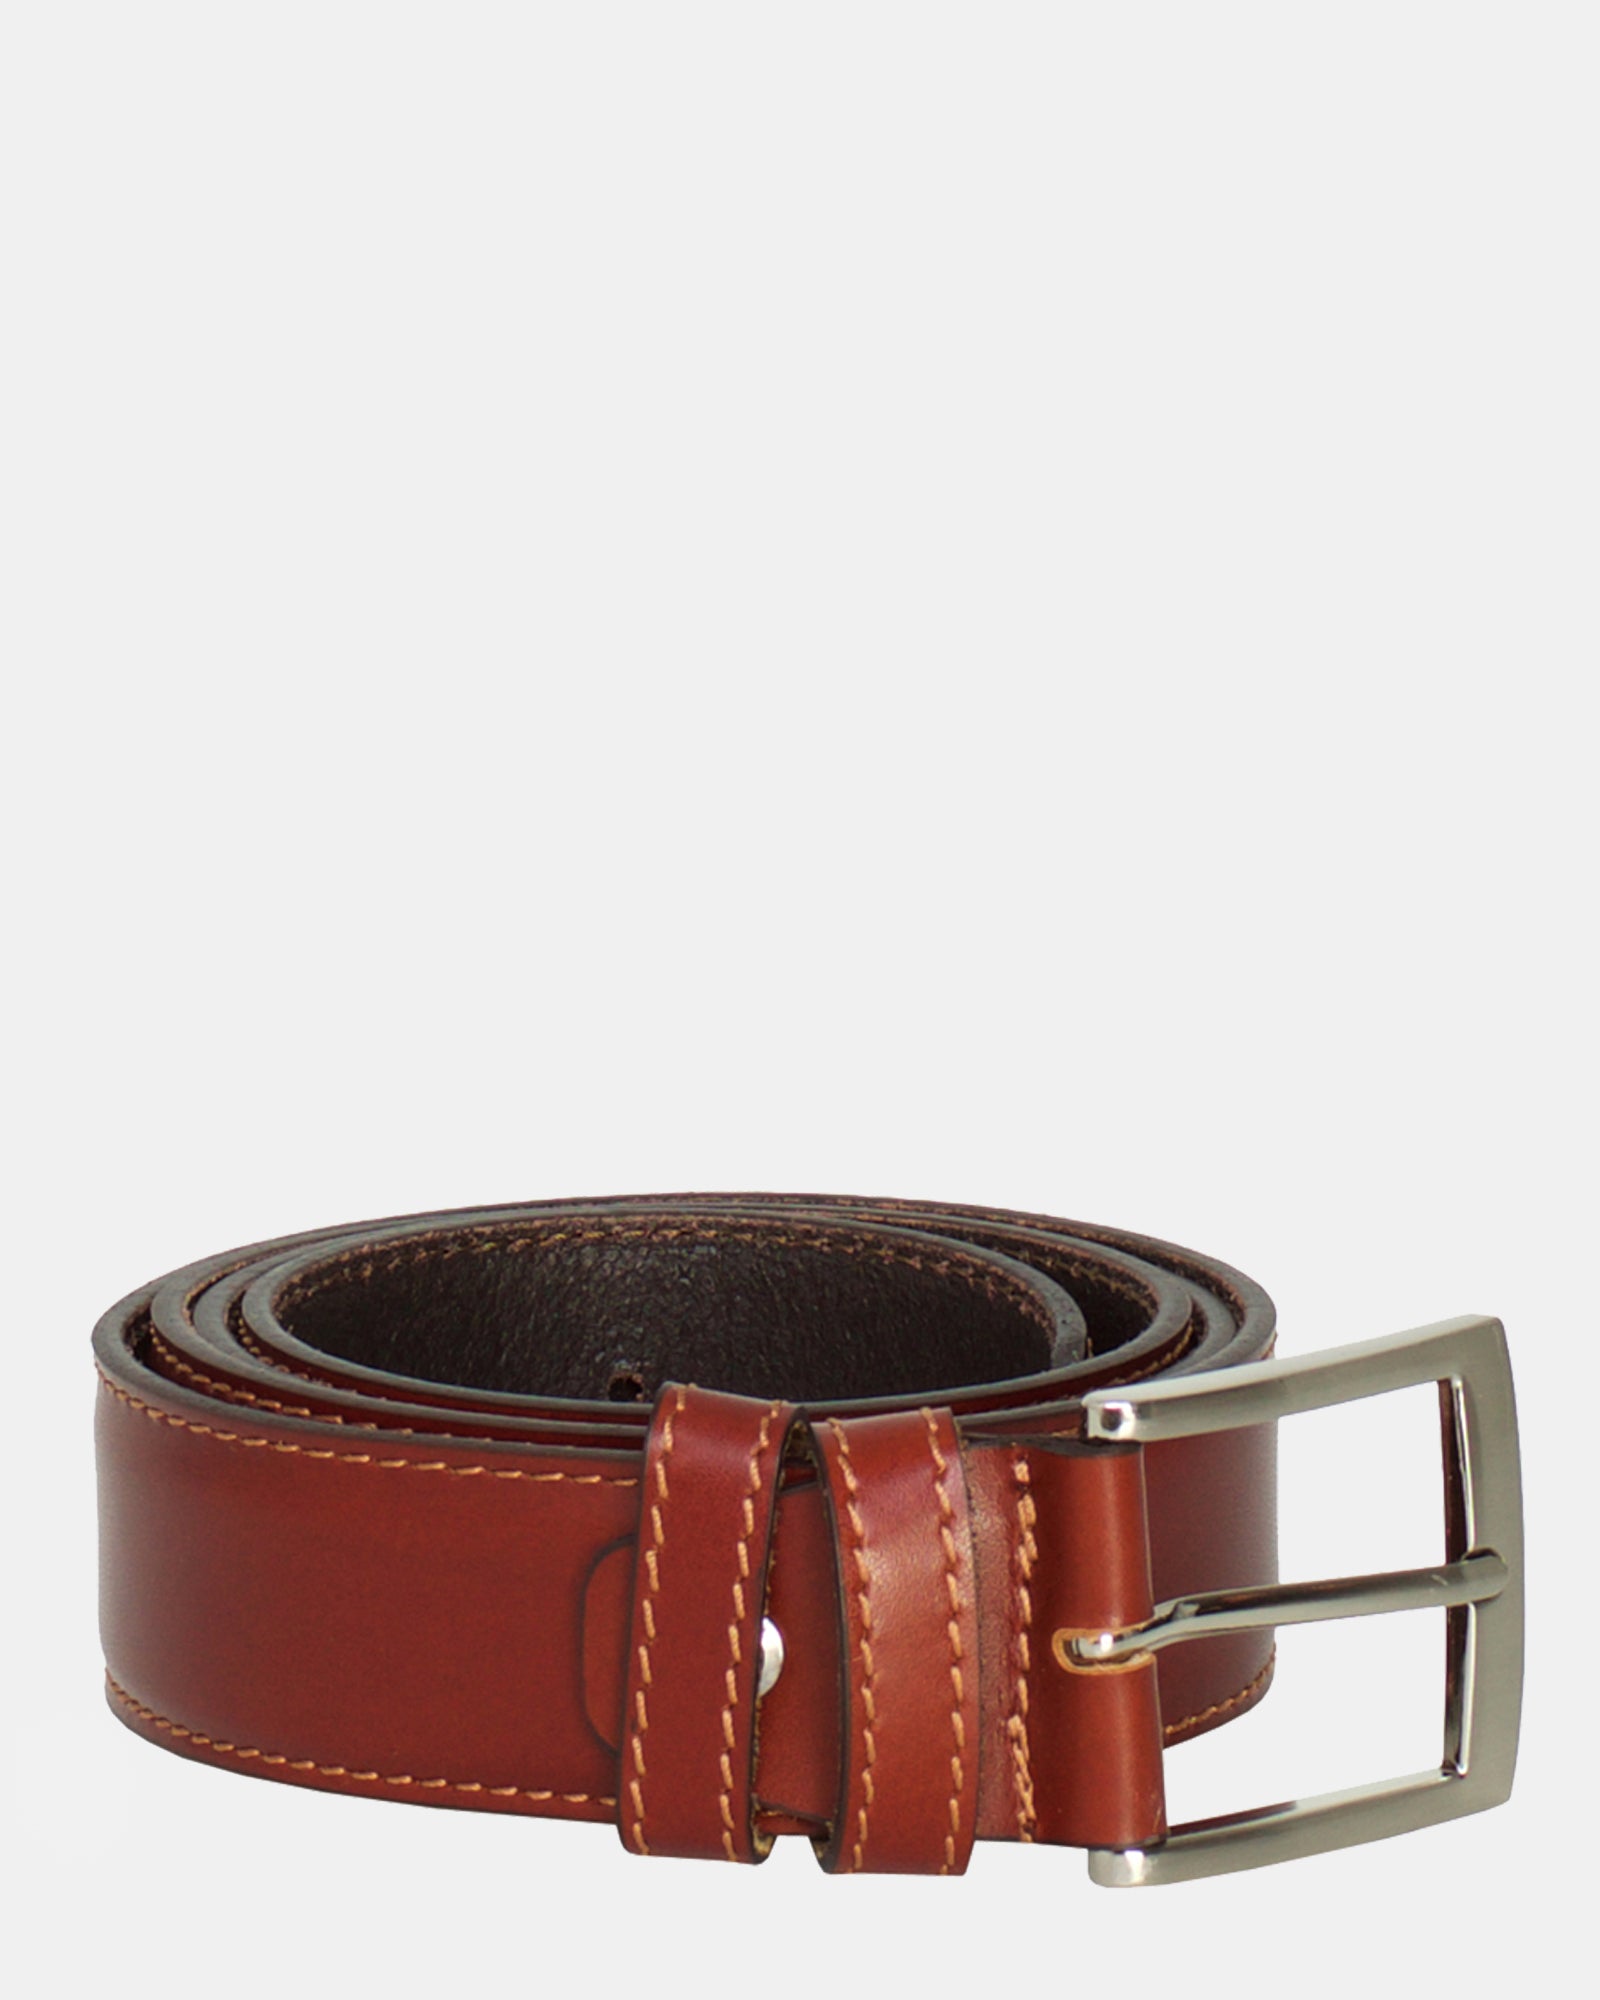 Buy Mens belt for jeans leather: Brown Camel Tan Suede, Wide